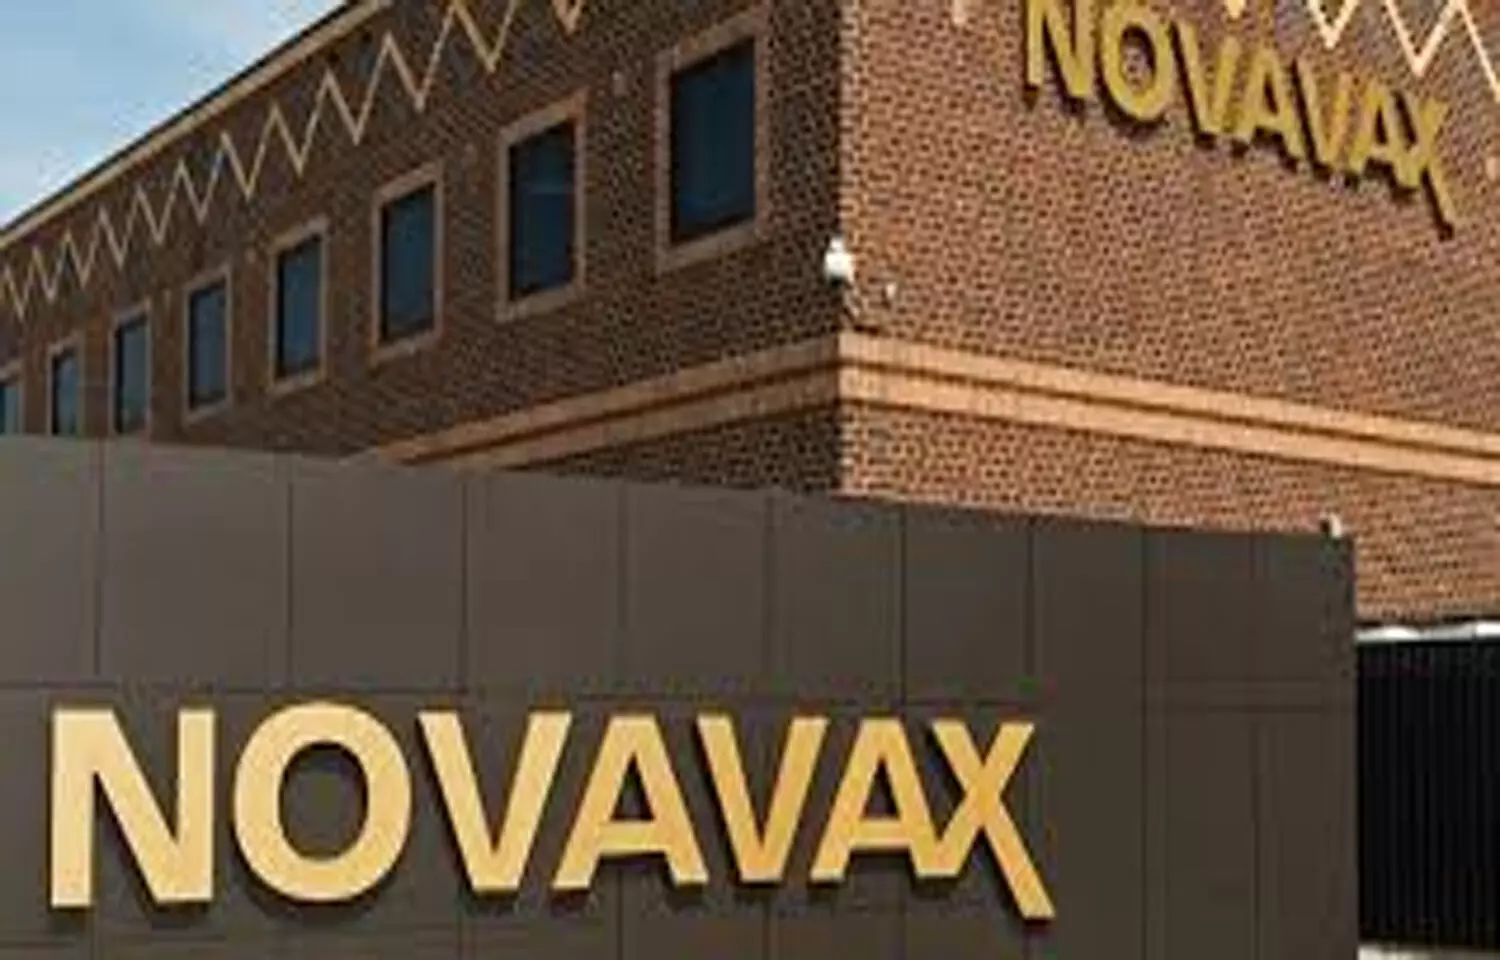 Novavax likely to come up with COVID vaccine targeting Omicron in Q4